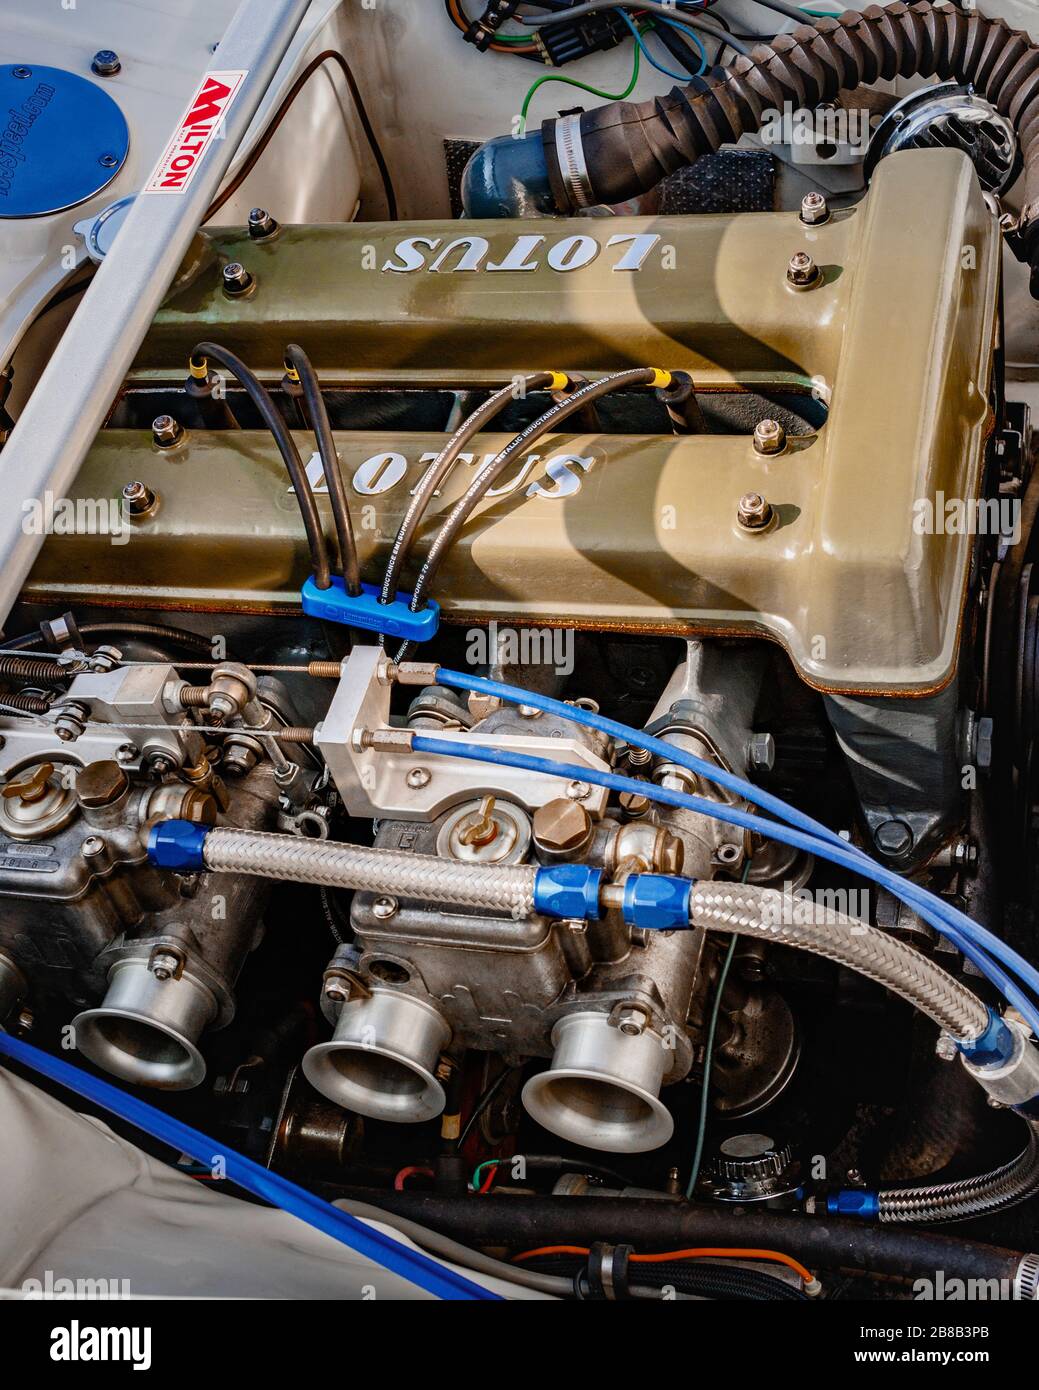 inside the engine of a classic lotus car Stock Photo